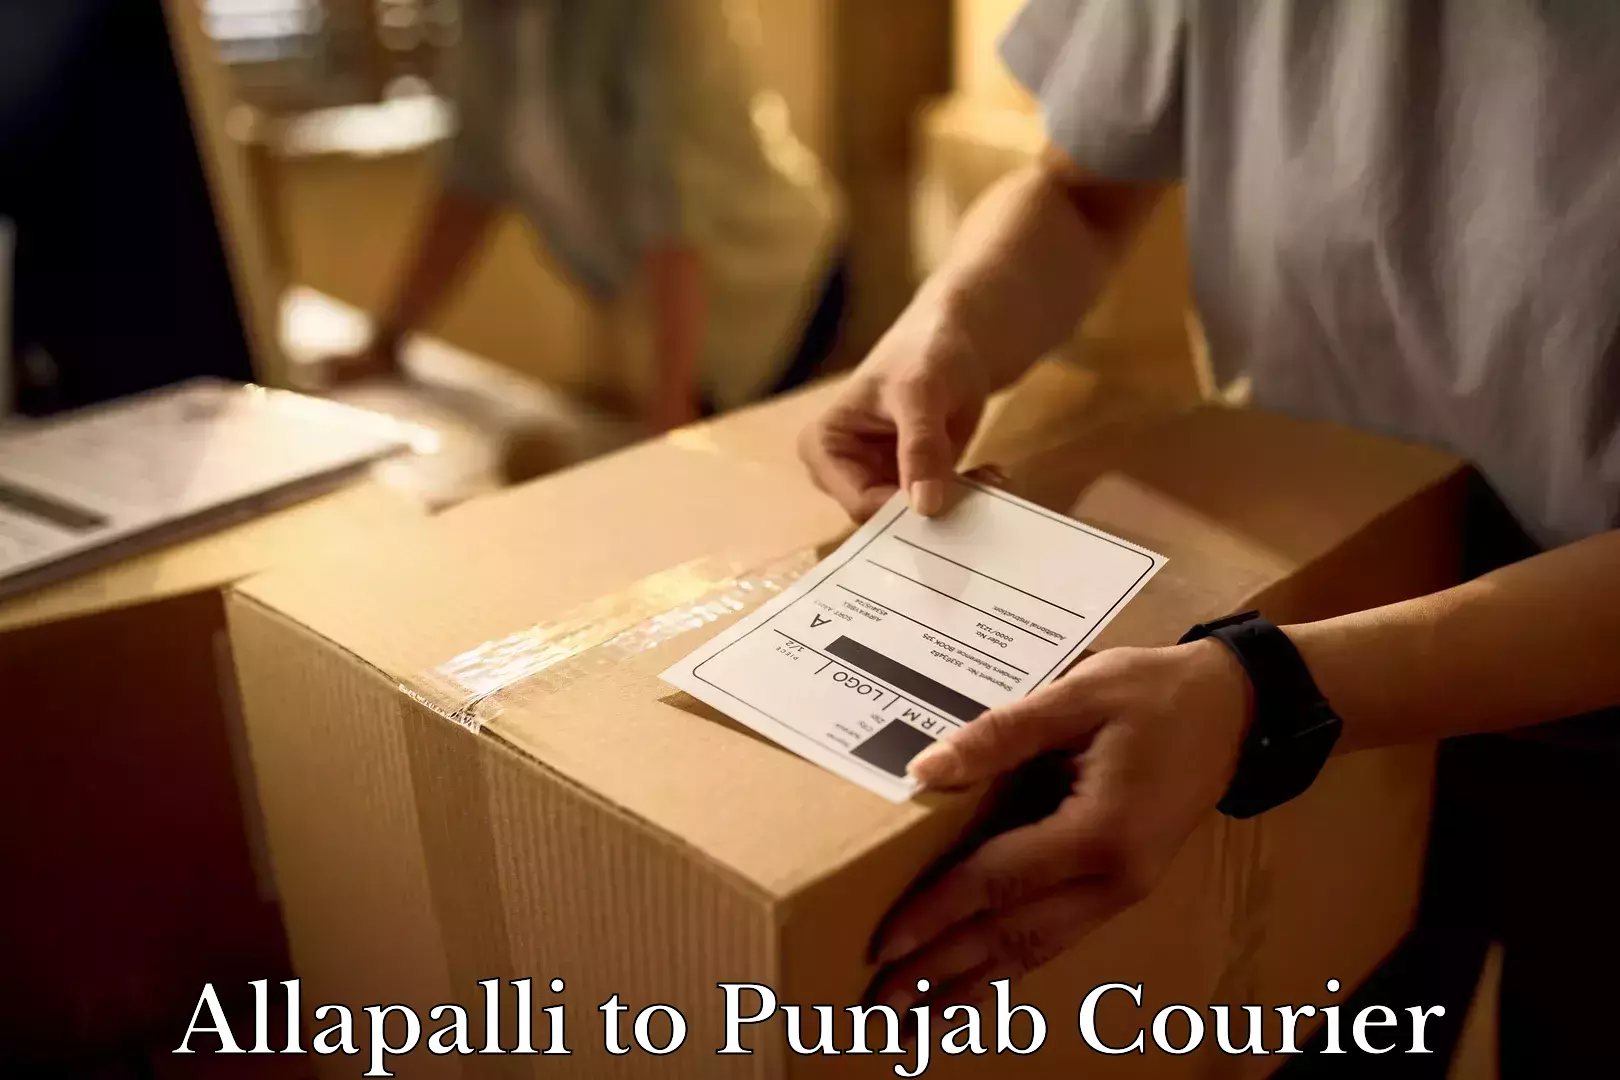 Furniture delivery service Allapalli to Goindwal Sahib